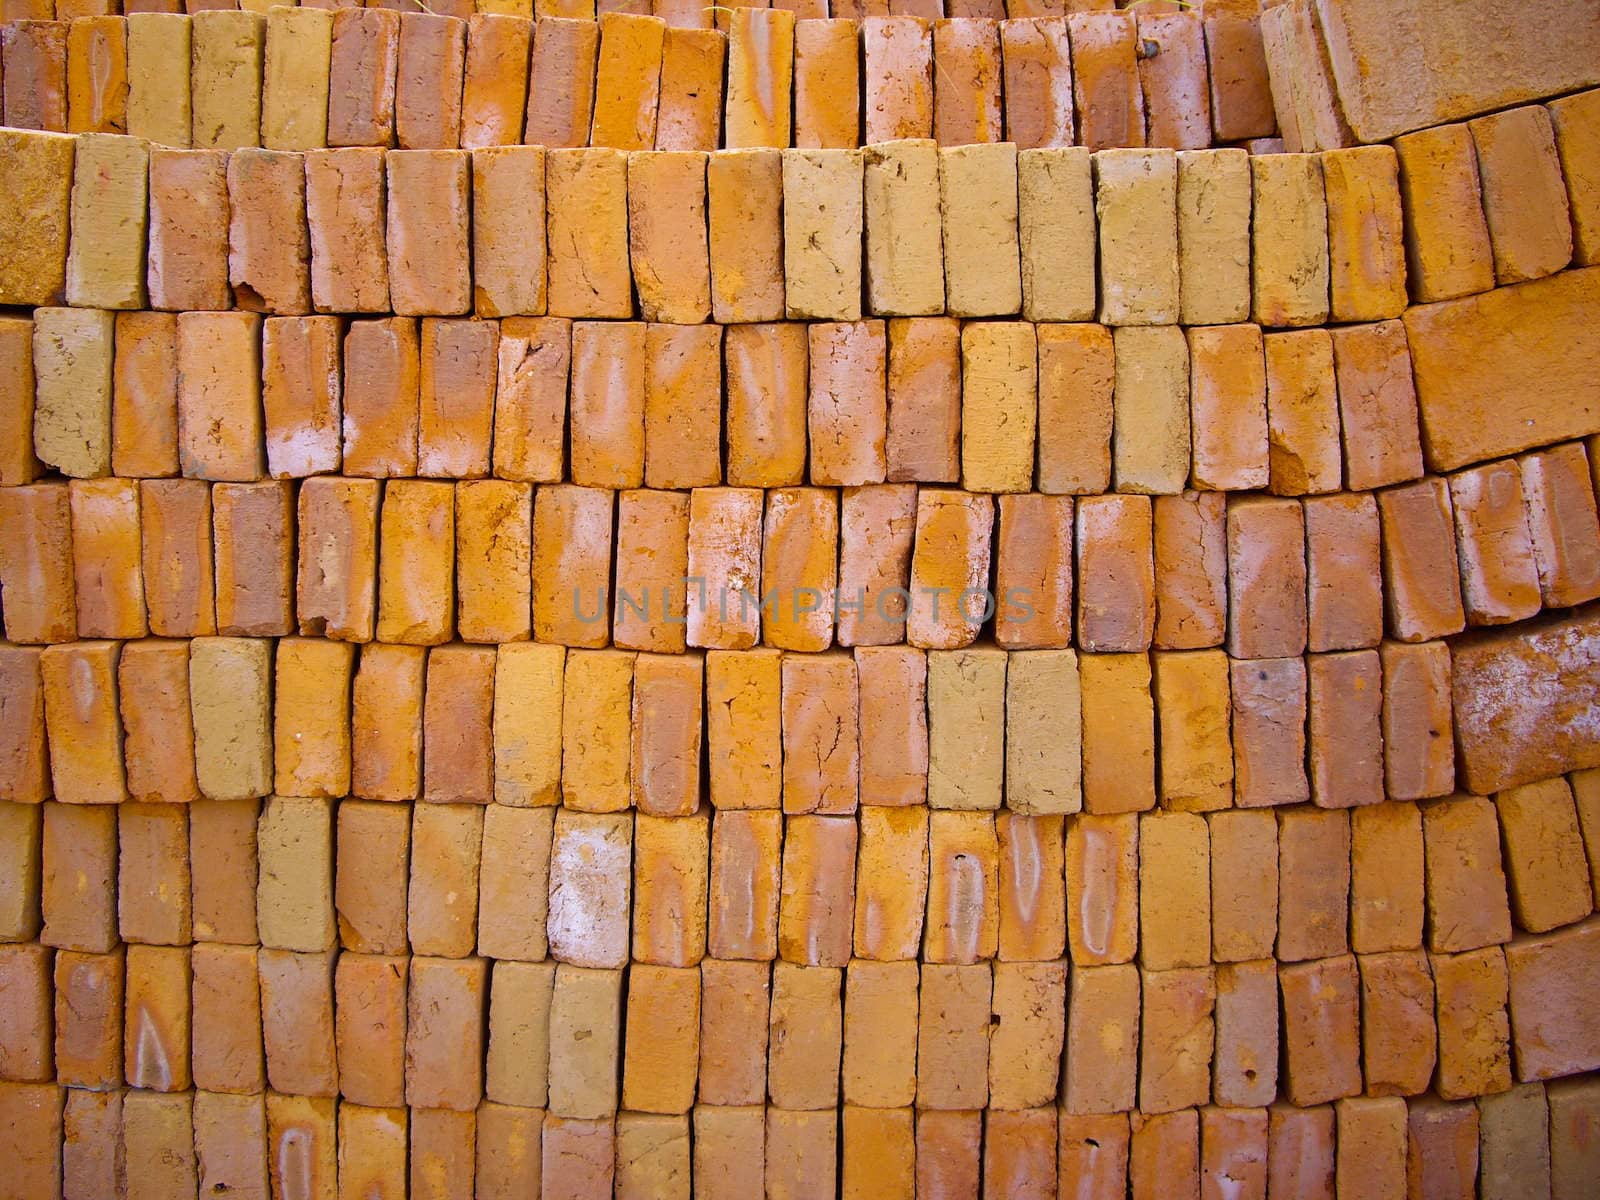 Bricks in rows ready to be used